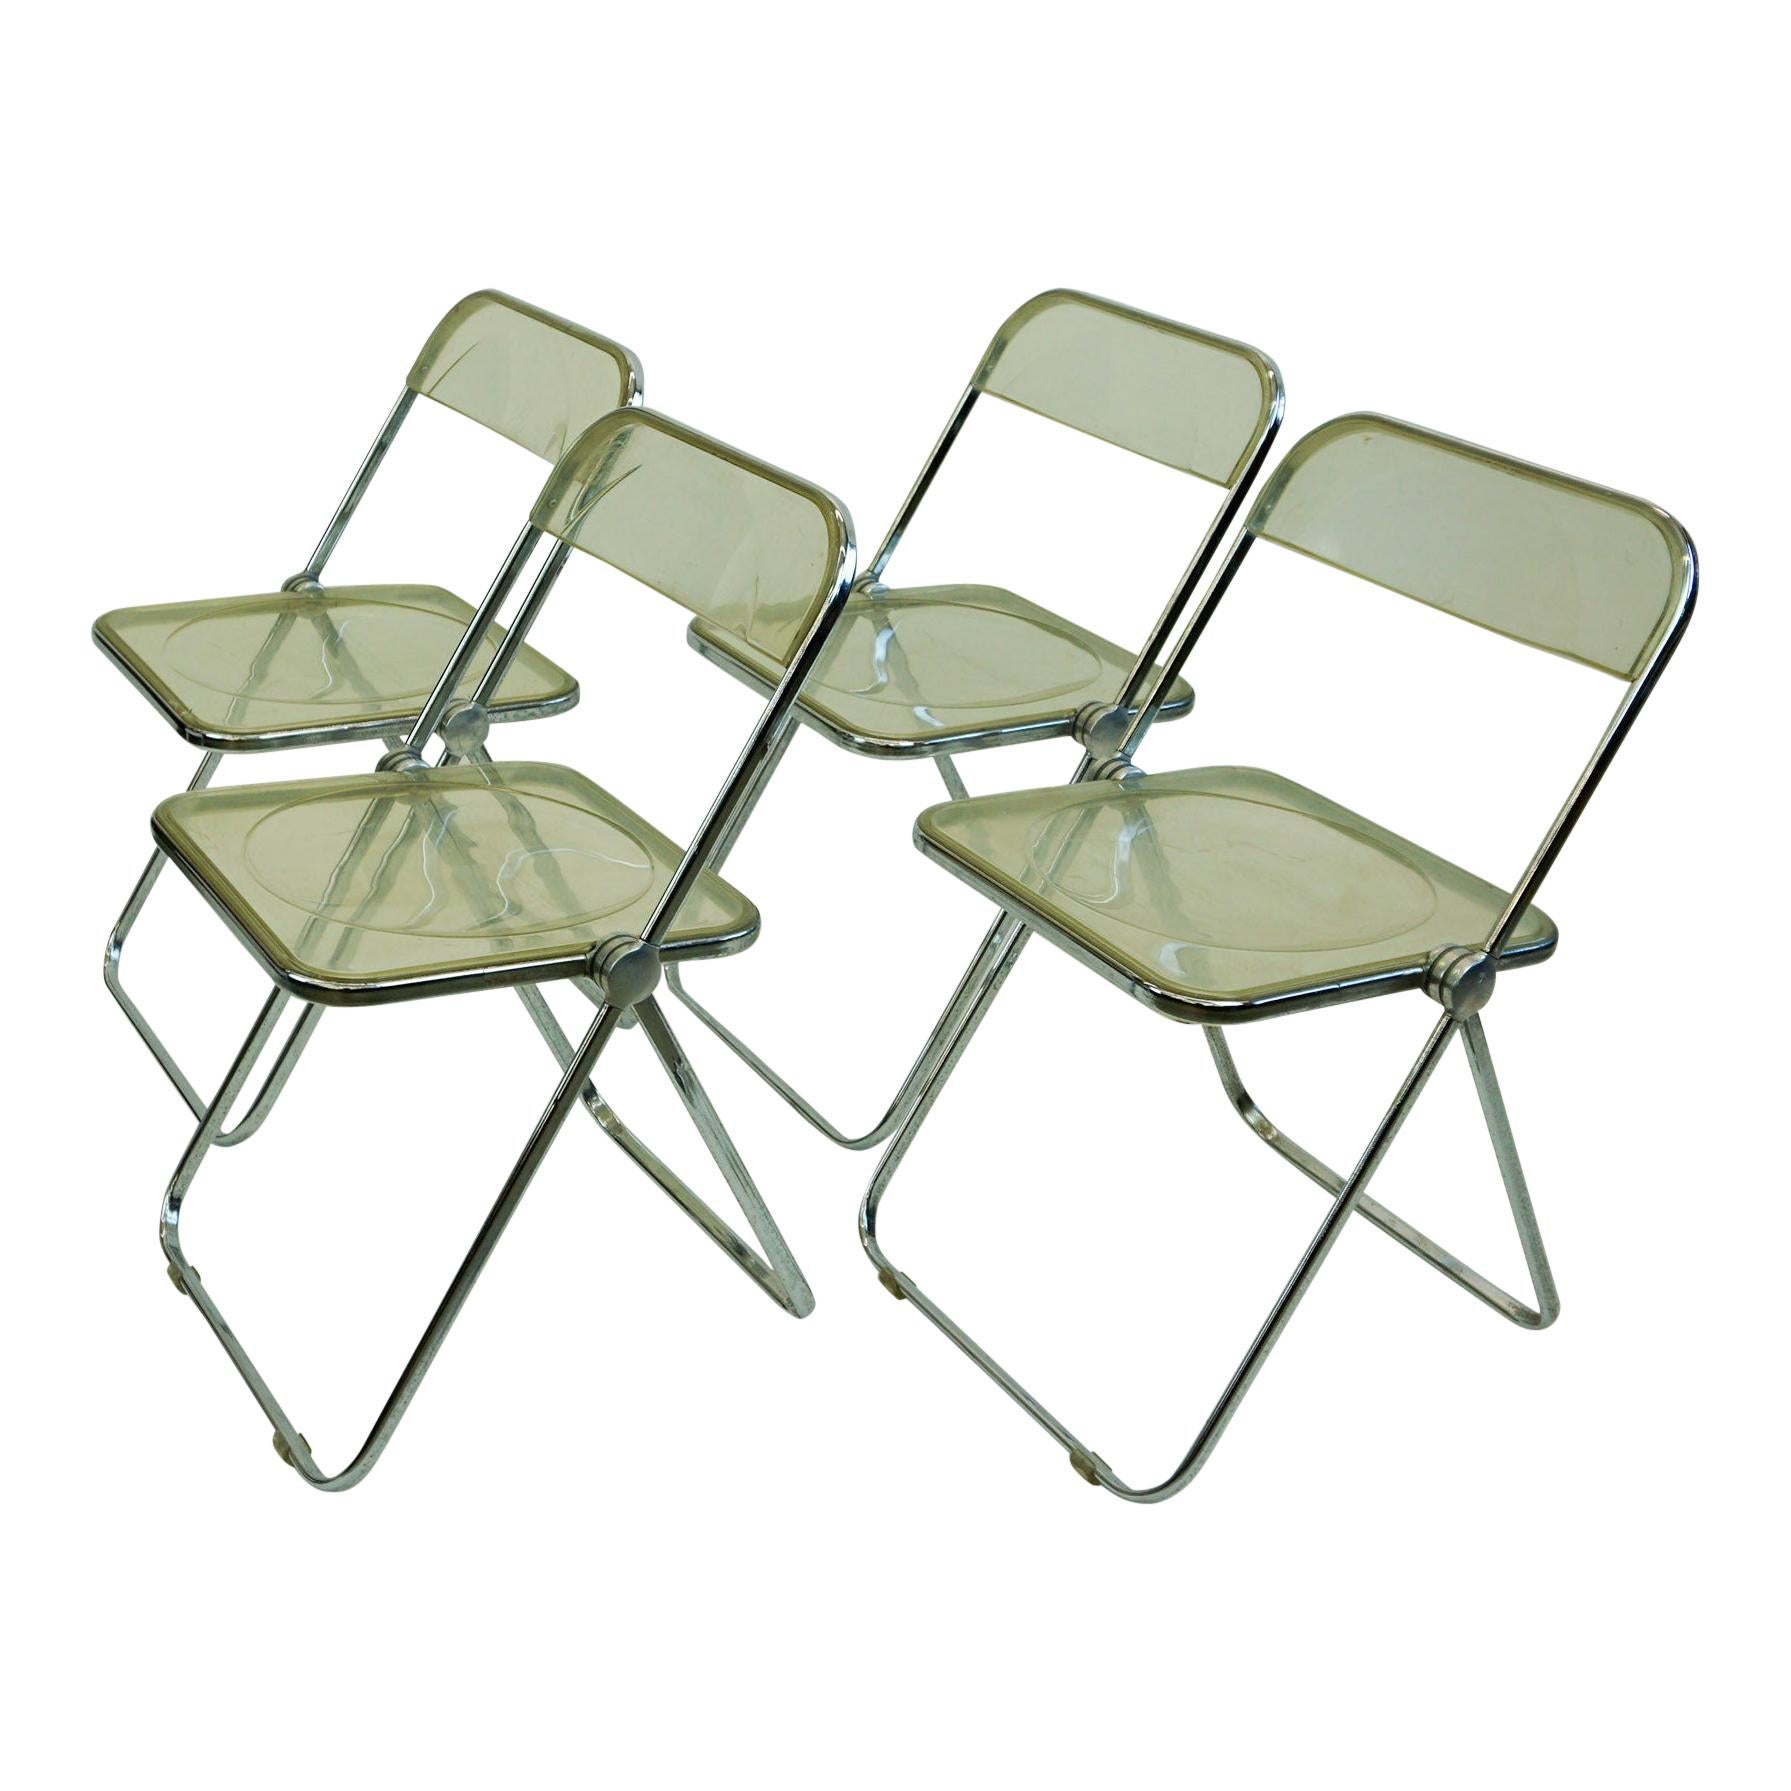 Italian 1960s Chrome and Lucite Plia Folding Chairs by G. Piretti for Castelli